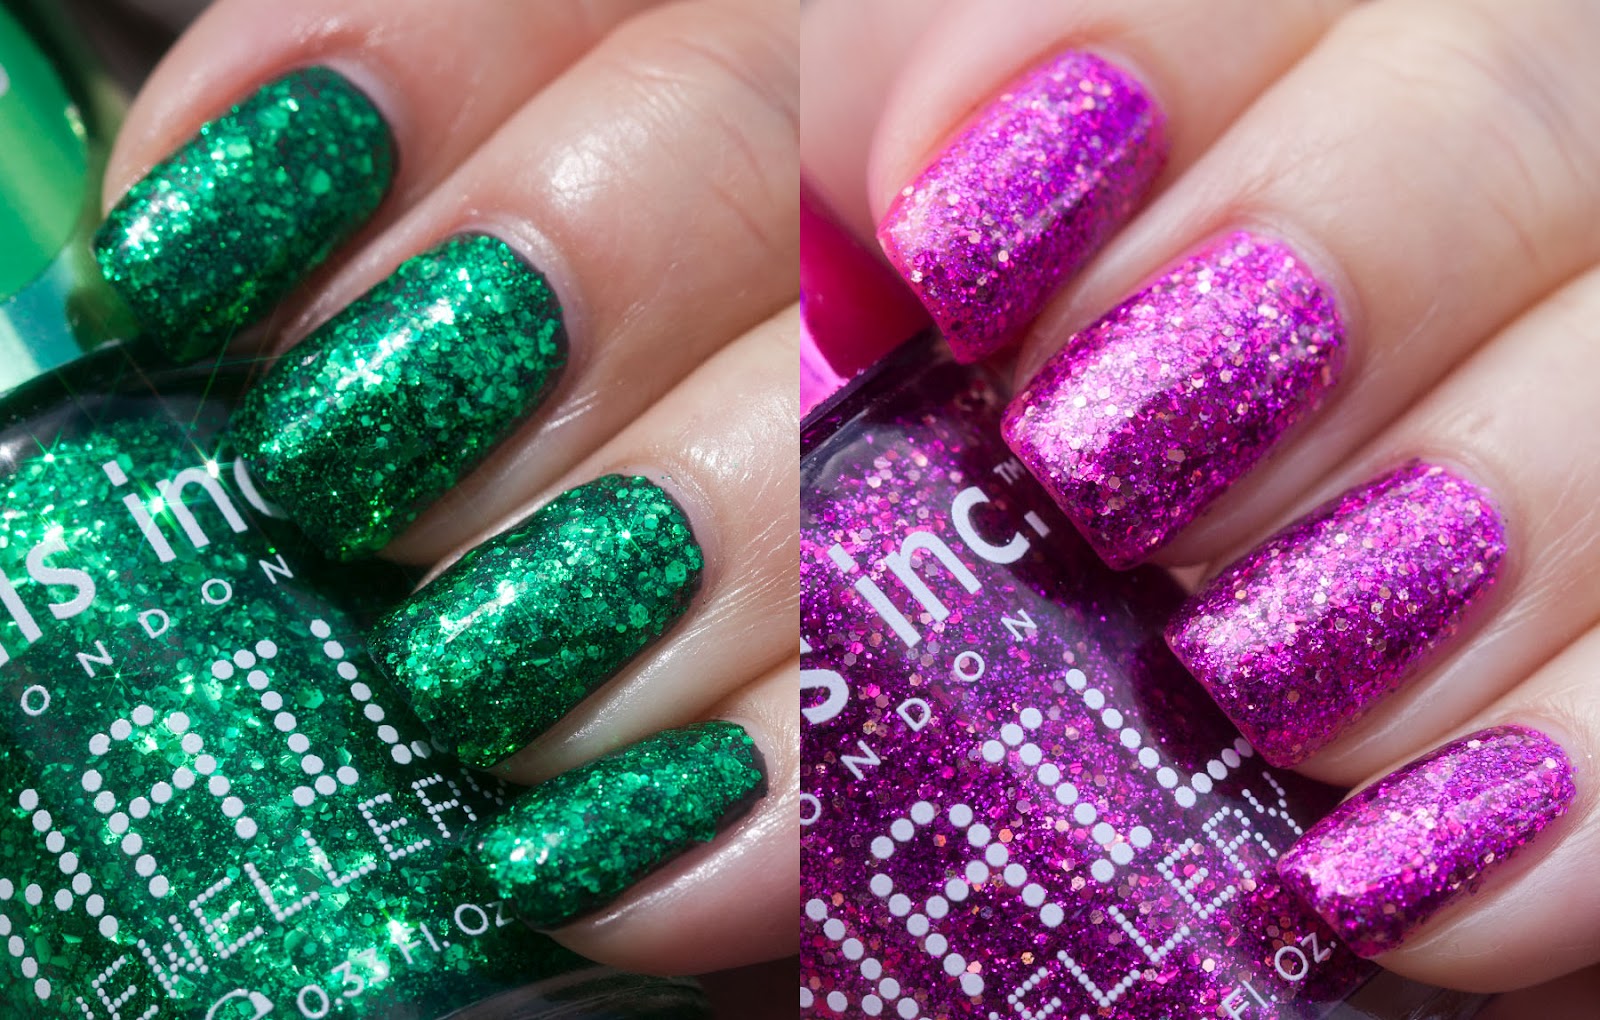 Today I brought to you another two great glitters from the Nails Inc Nail